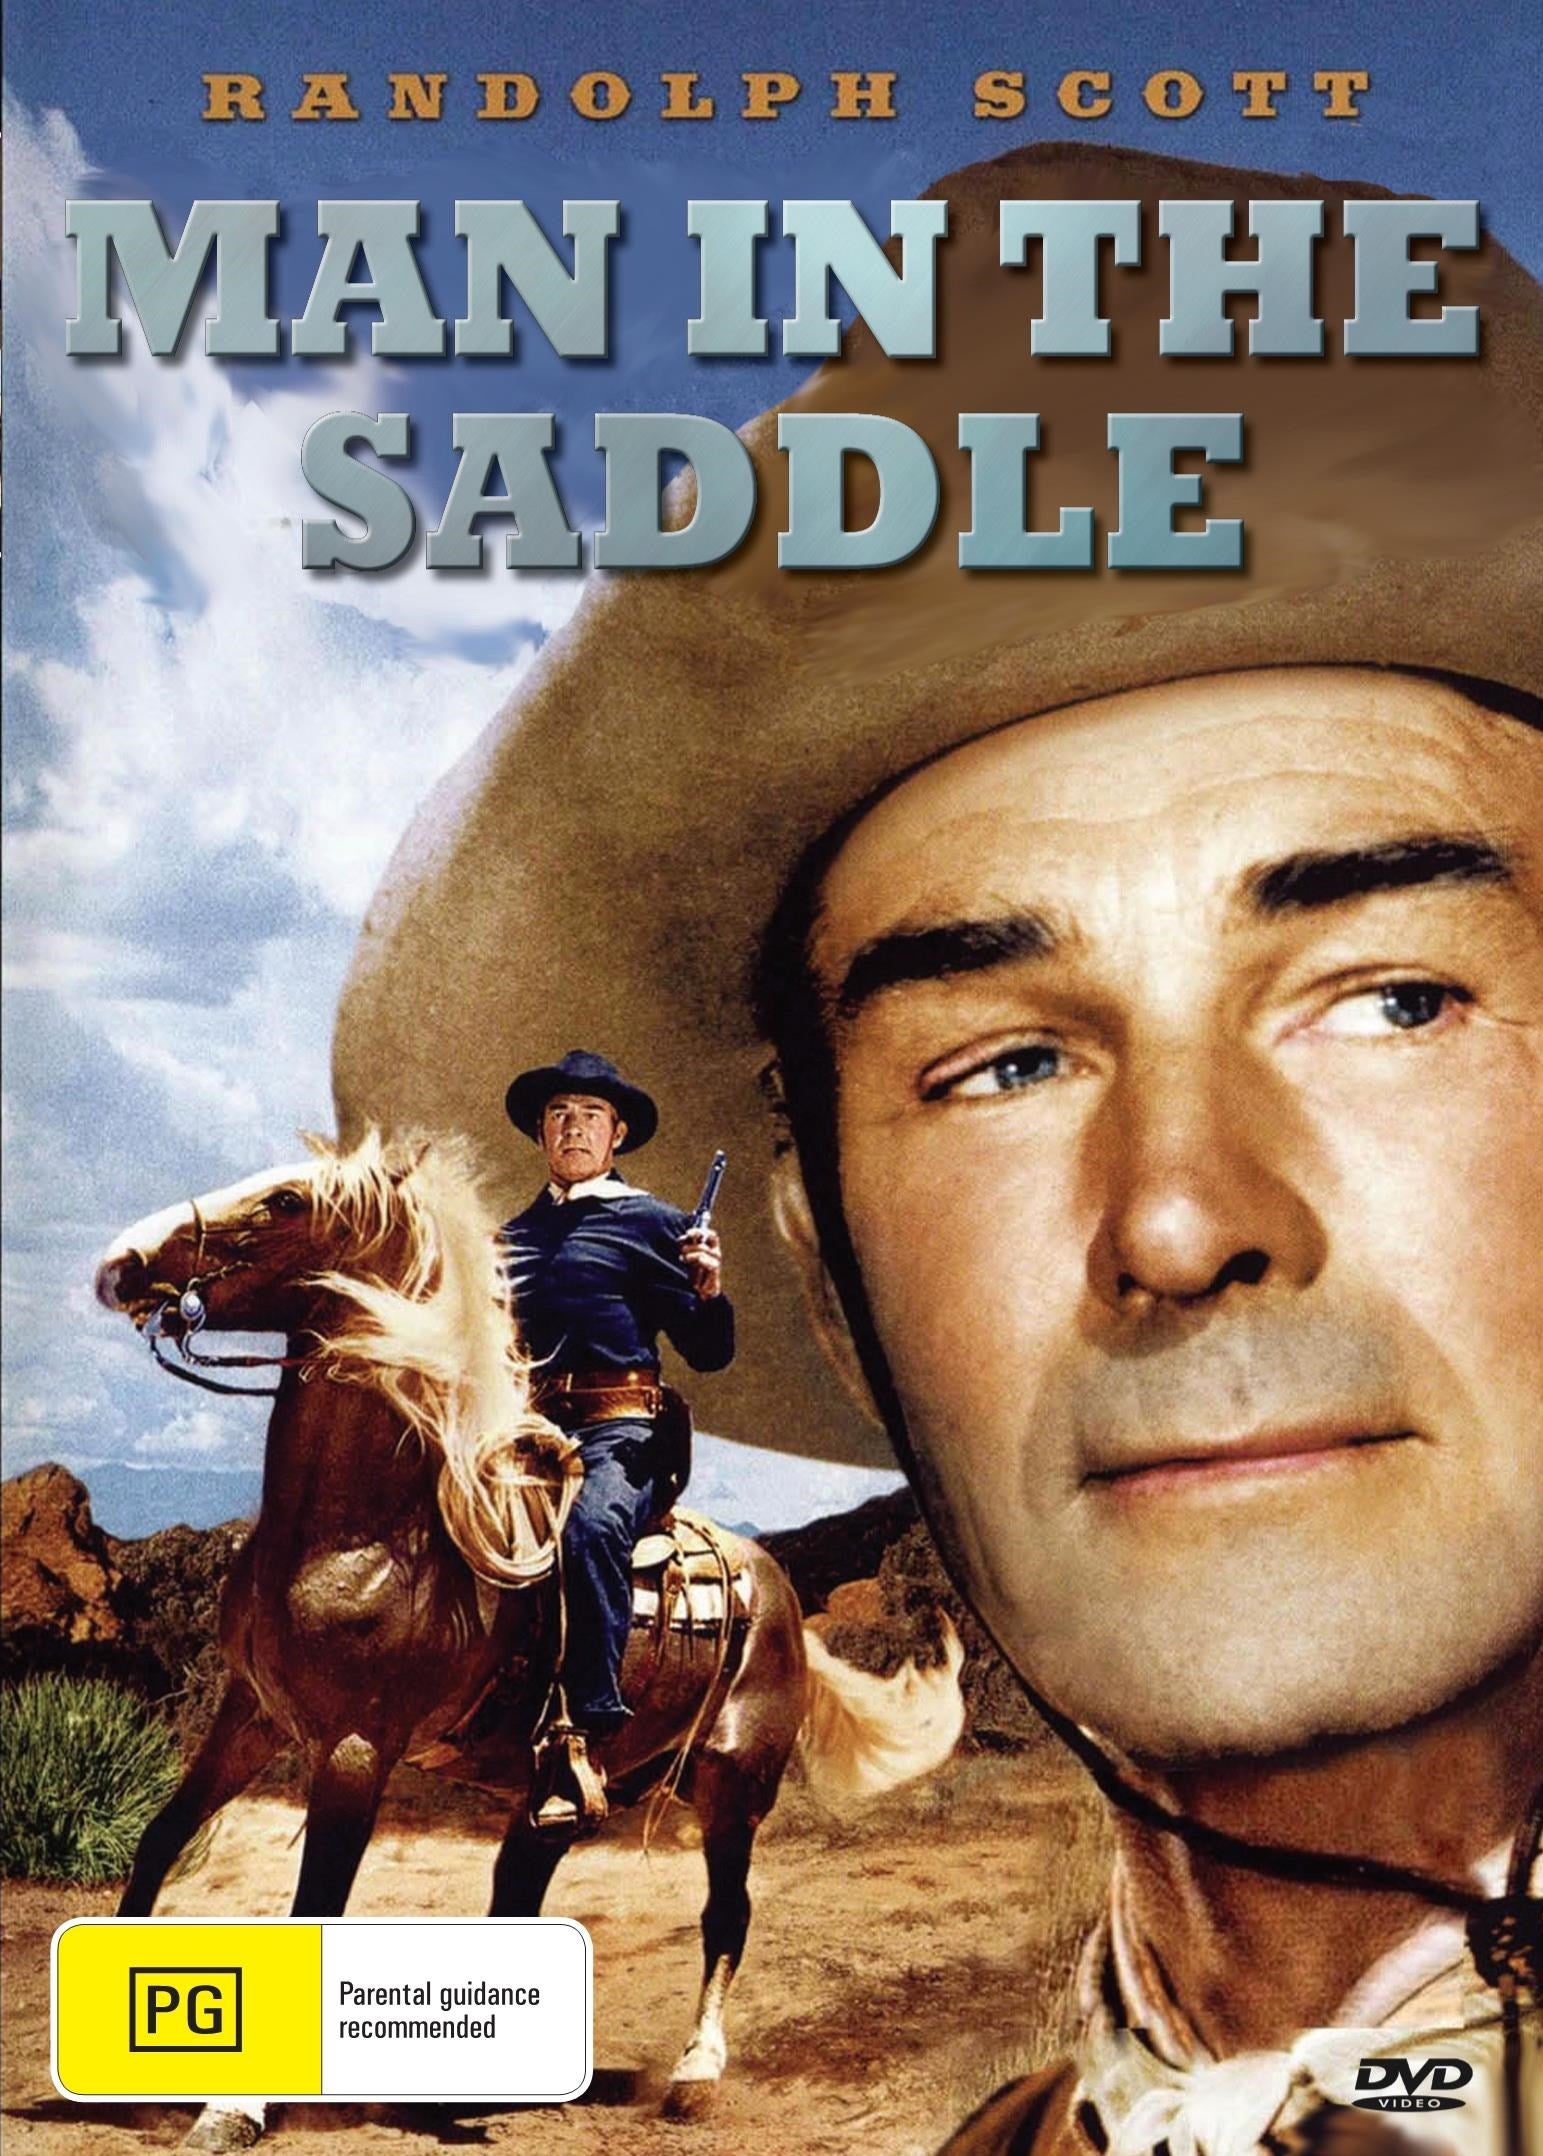 Man in the Saddle rareandcollectibledvds